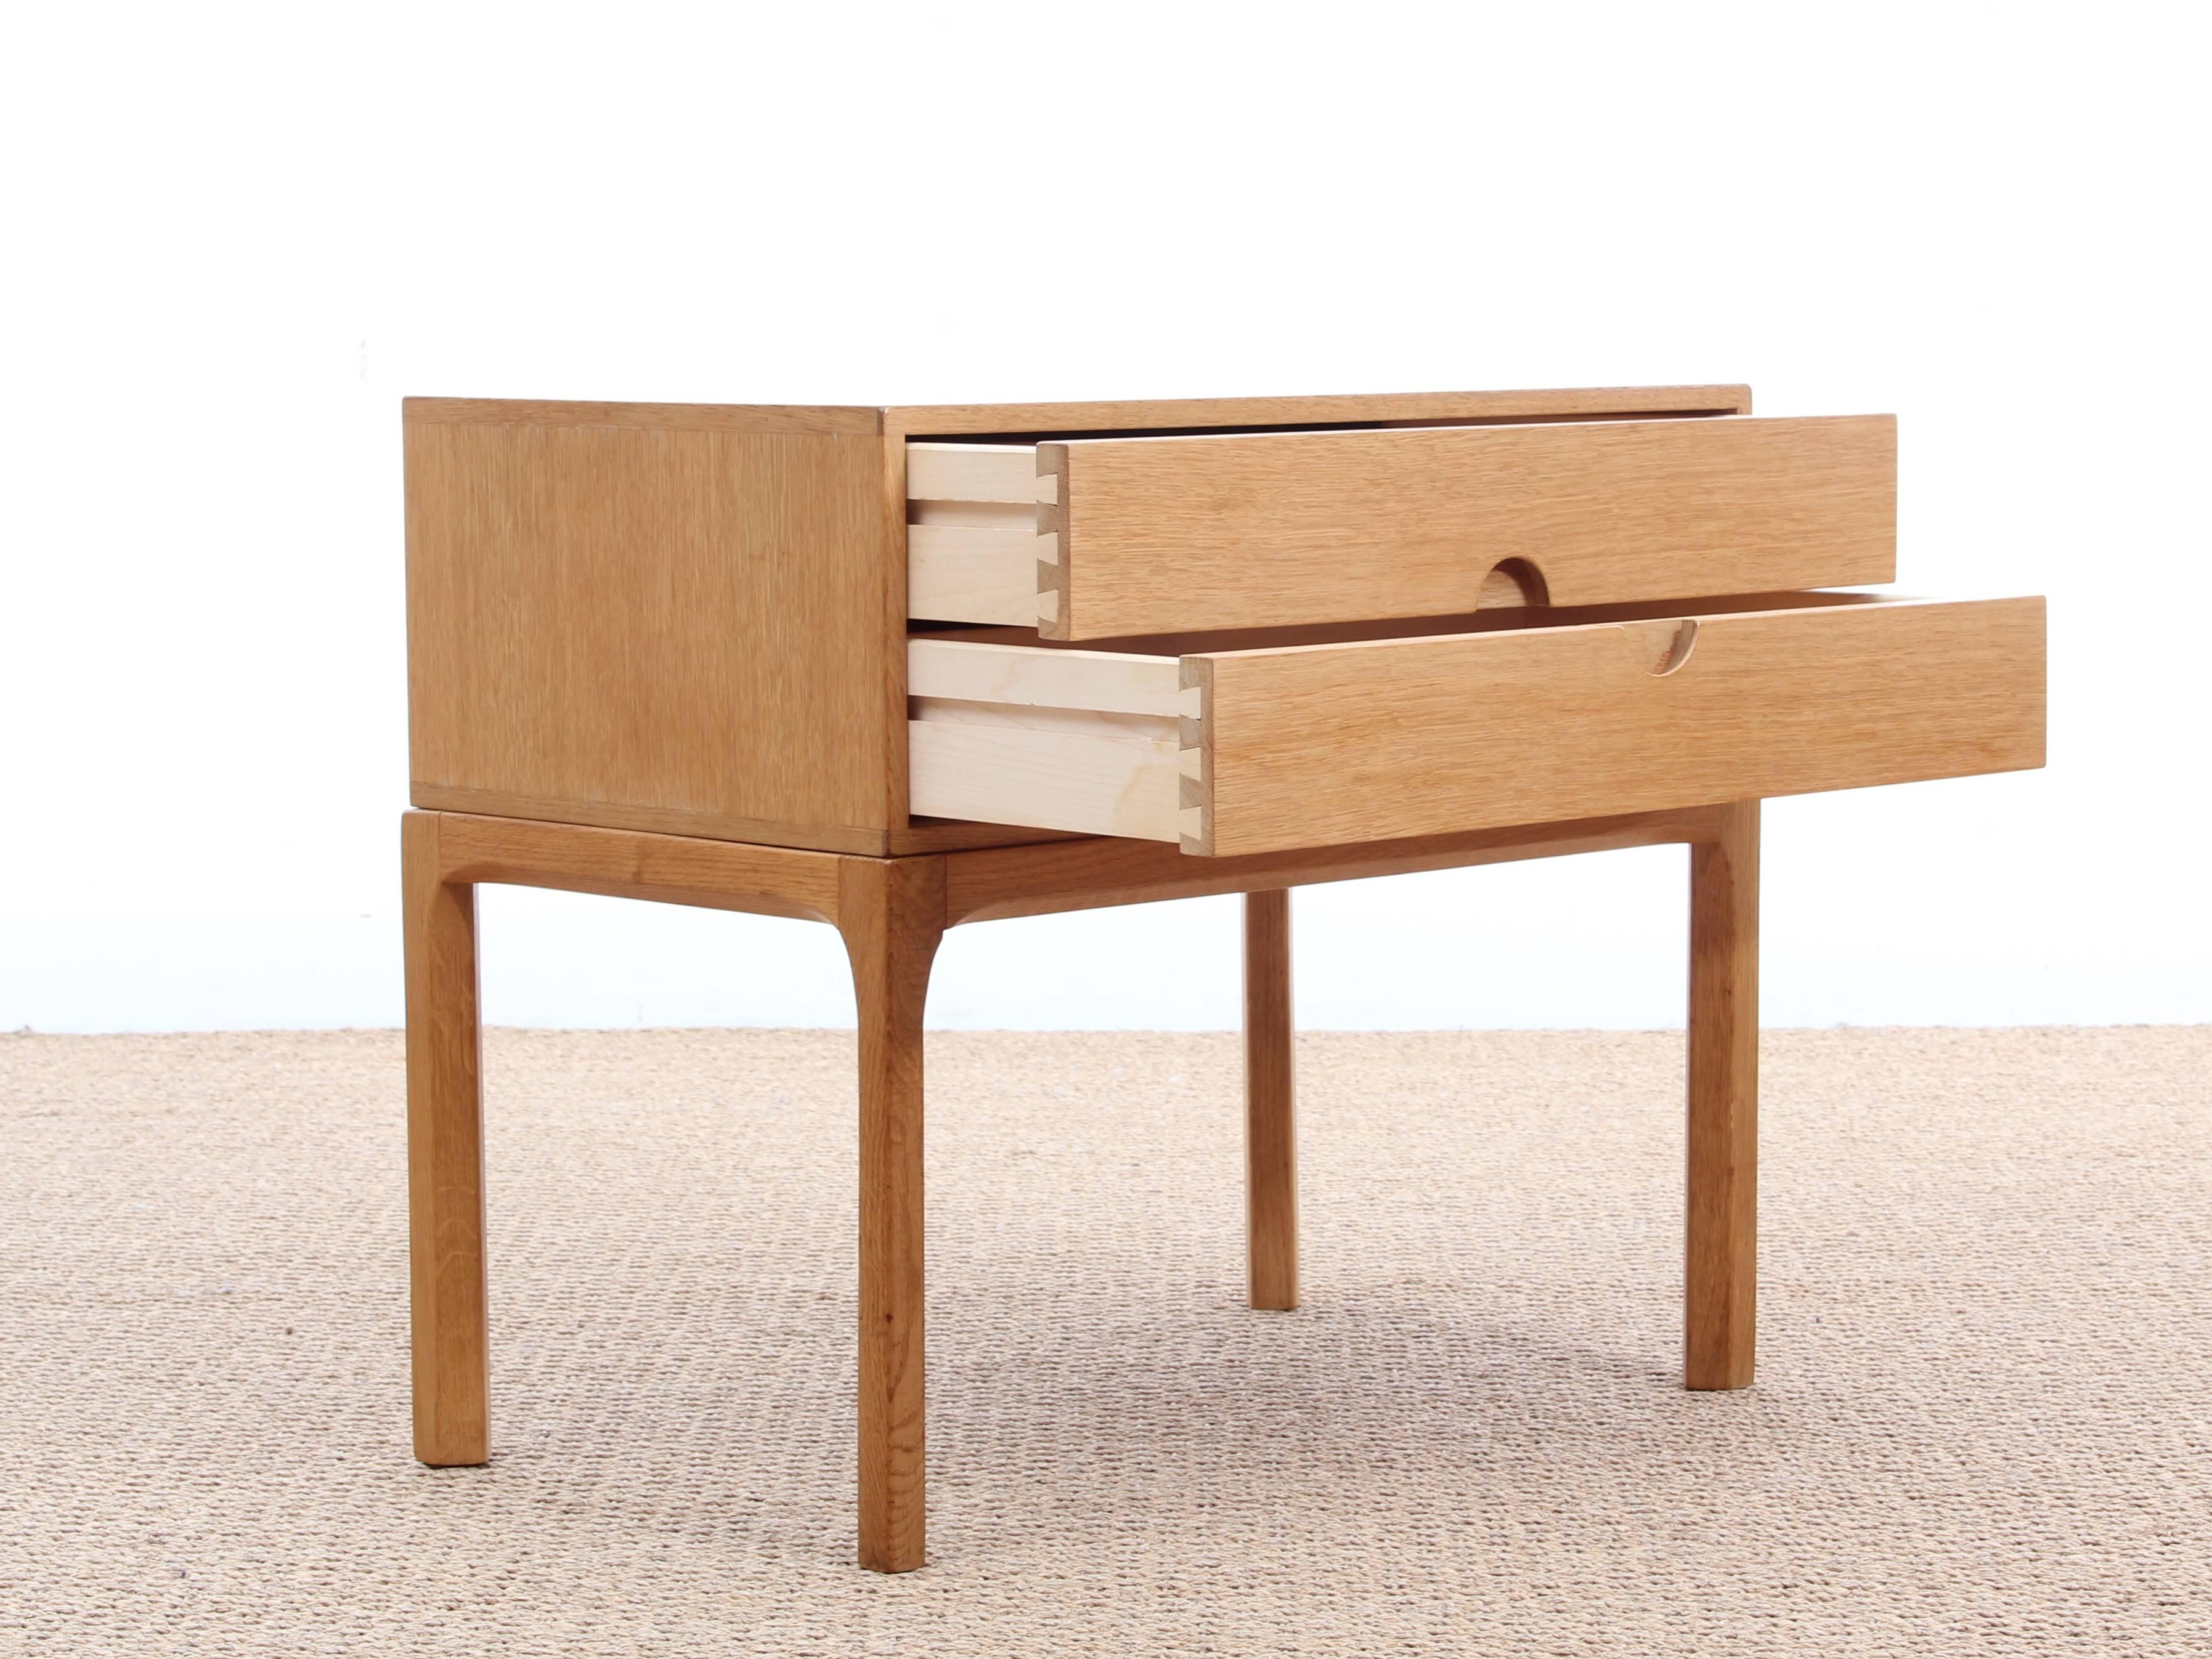 Danish Mid-Century Modern Chest of Drawers or Bed Table in Oak by Kai Kristiansen